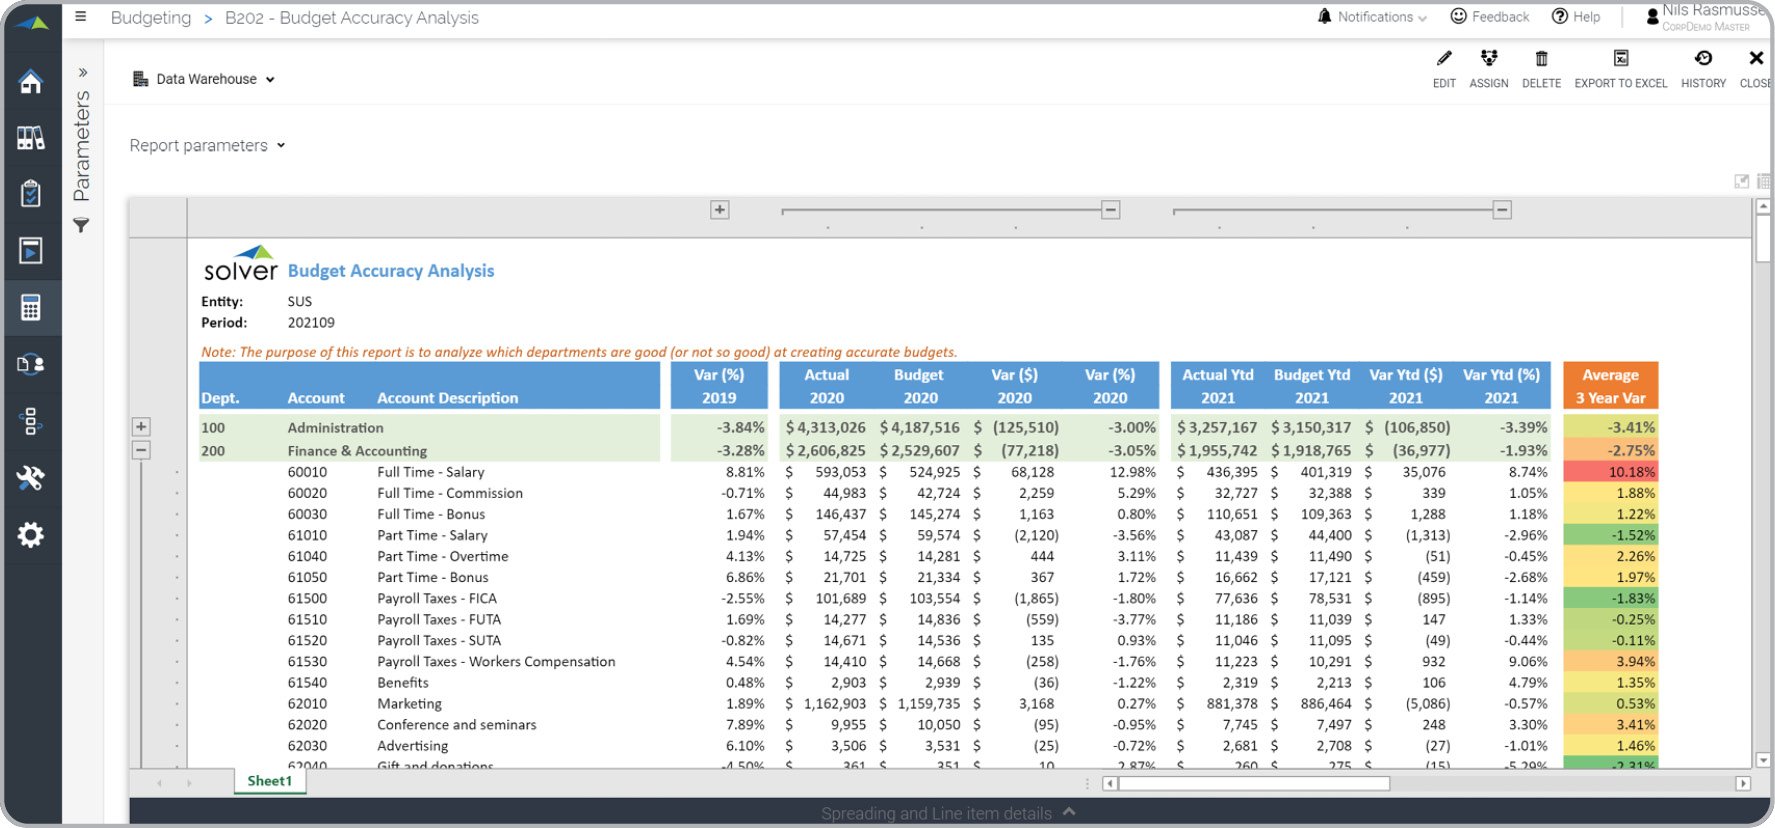 Compare budgets from prior years to analyze ACCURACY before the new budget process.